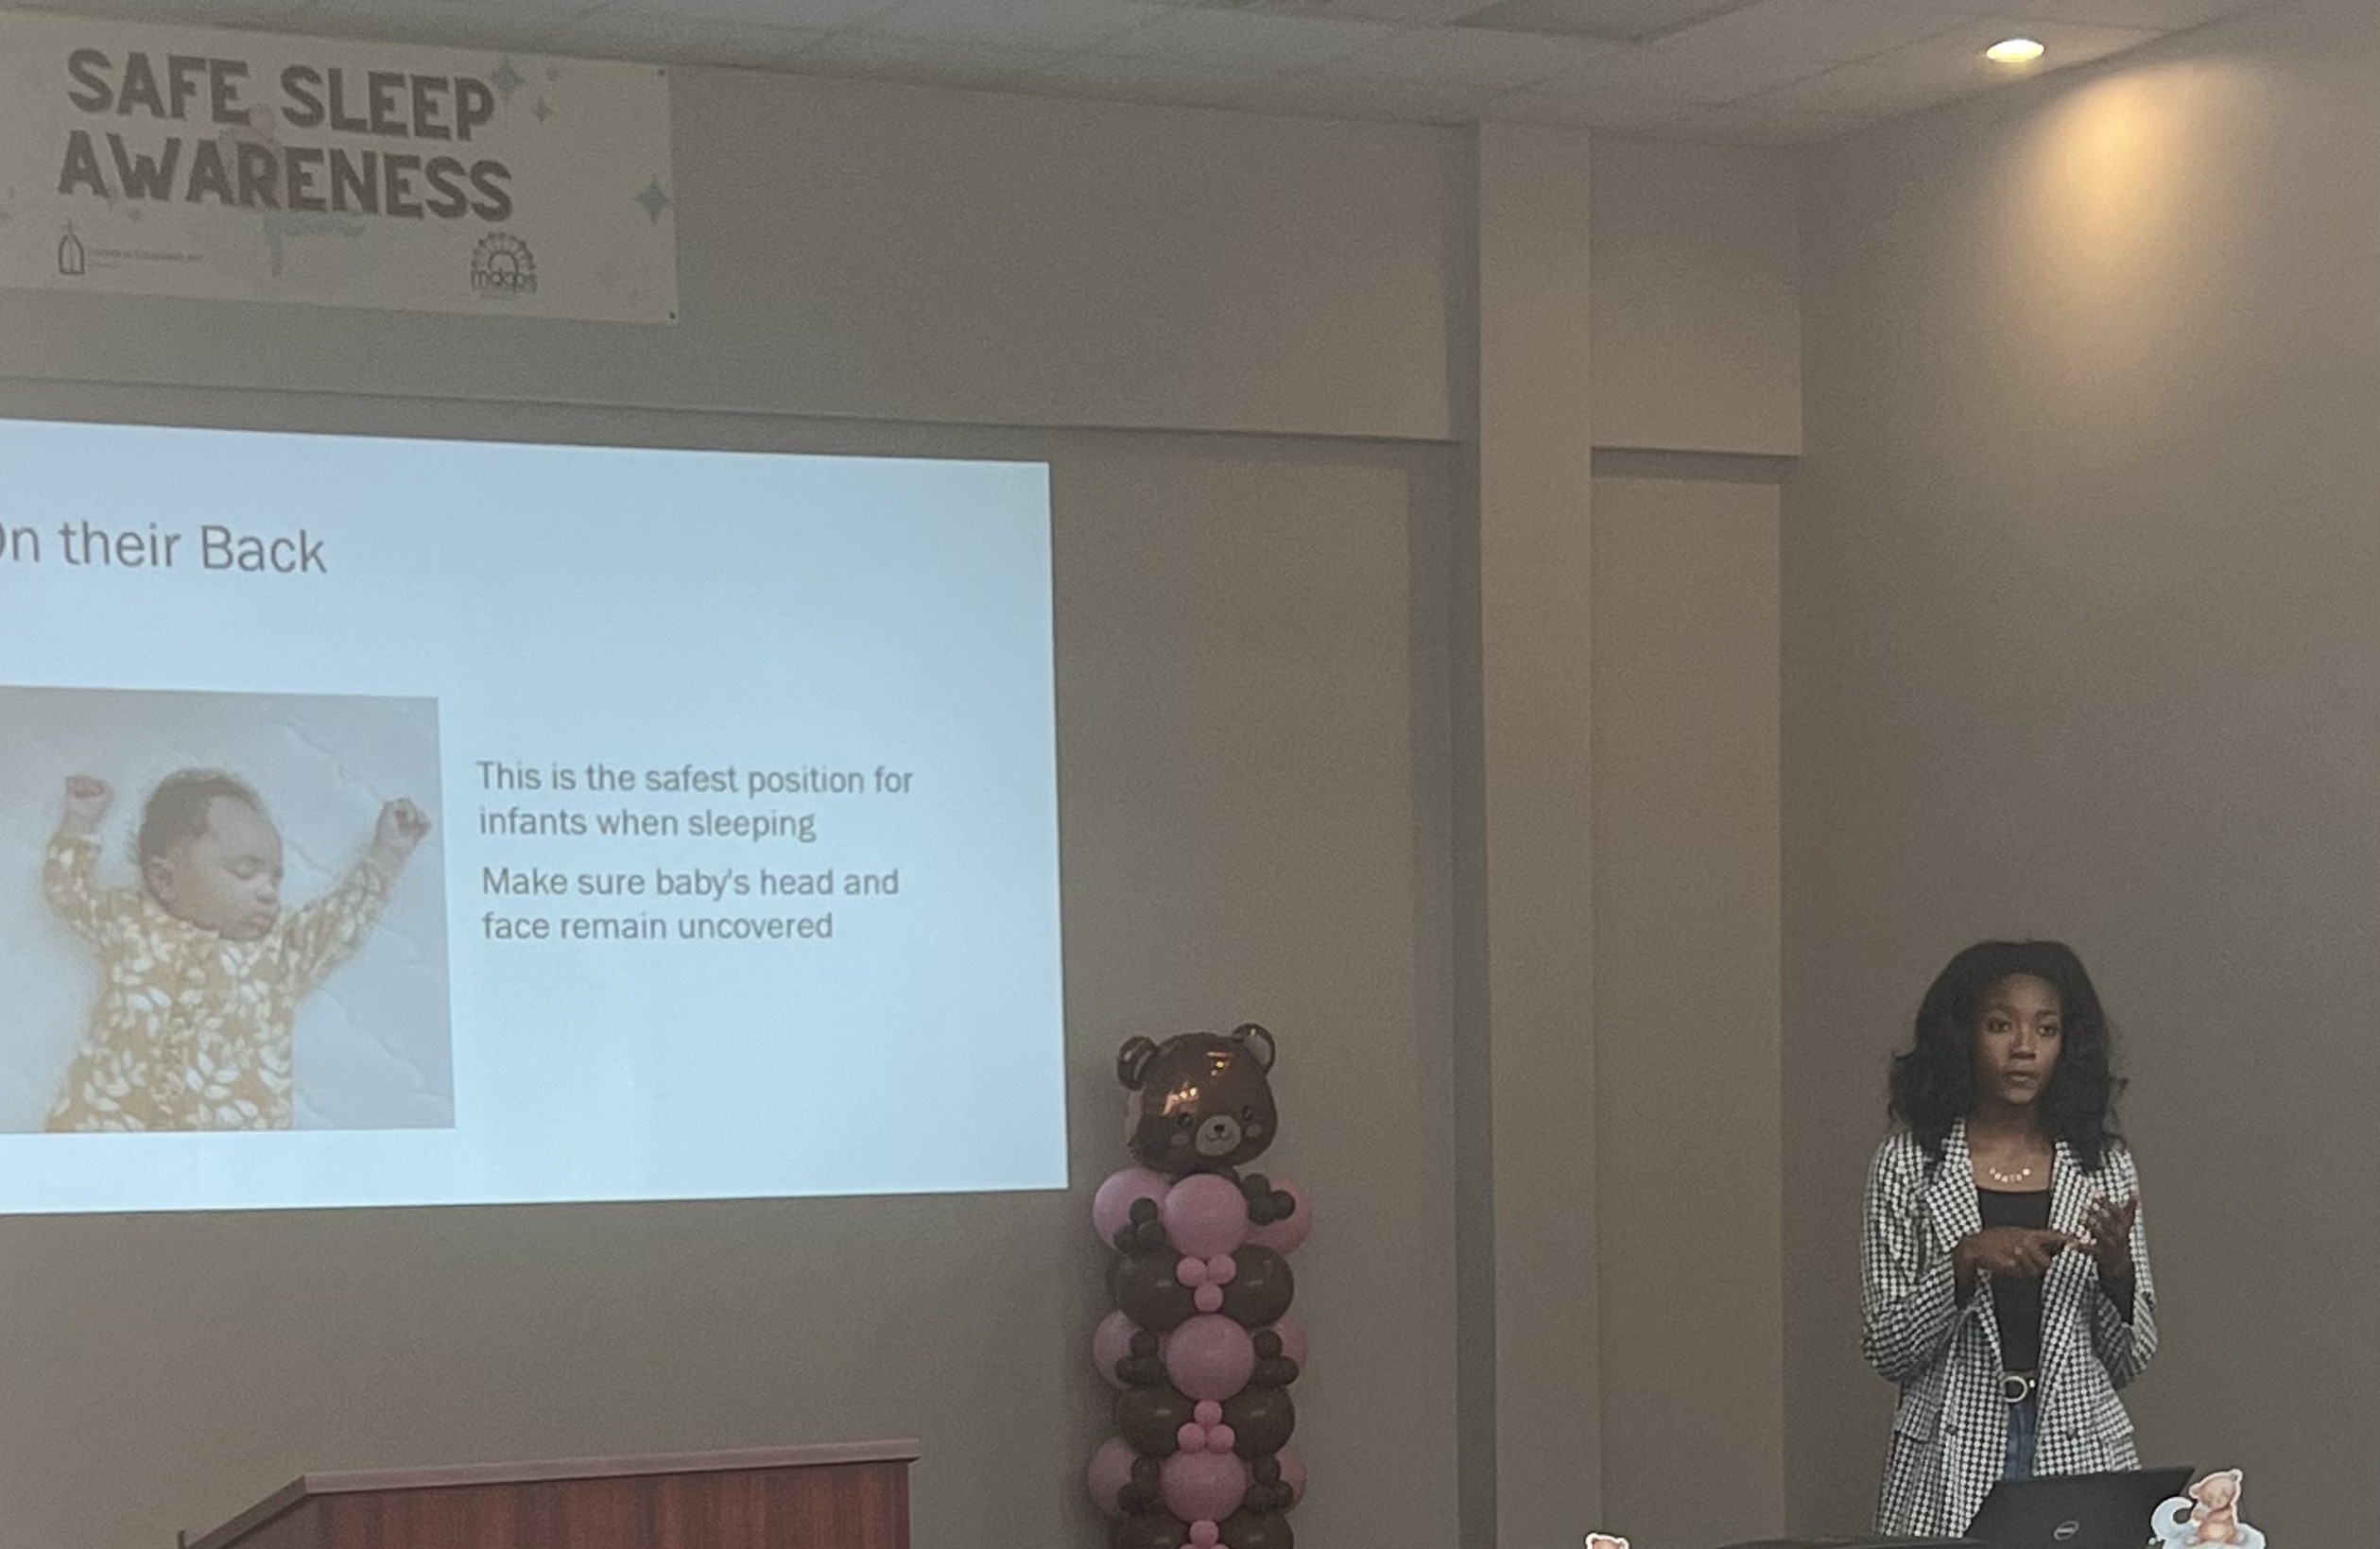 A Black woman stands behind a table and gives a presentation, with a PowerPoint projected behind her showing a picture of a Black newborn.